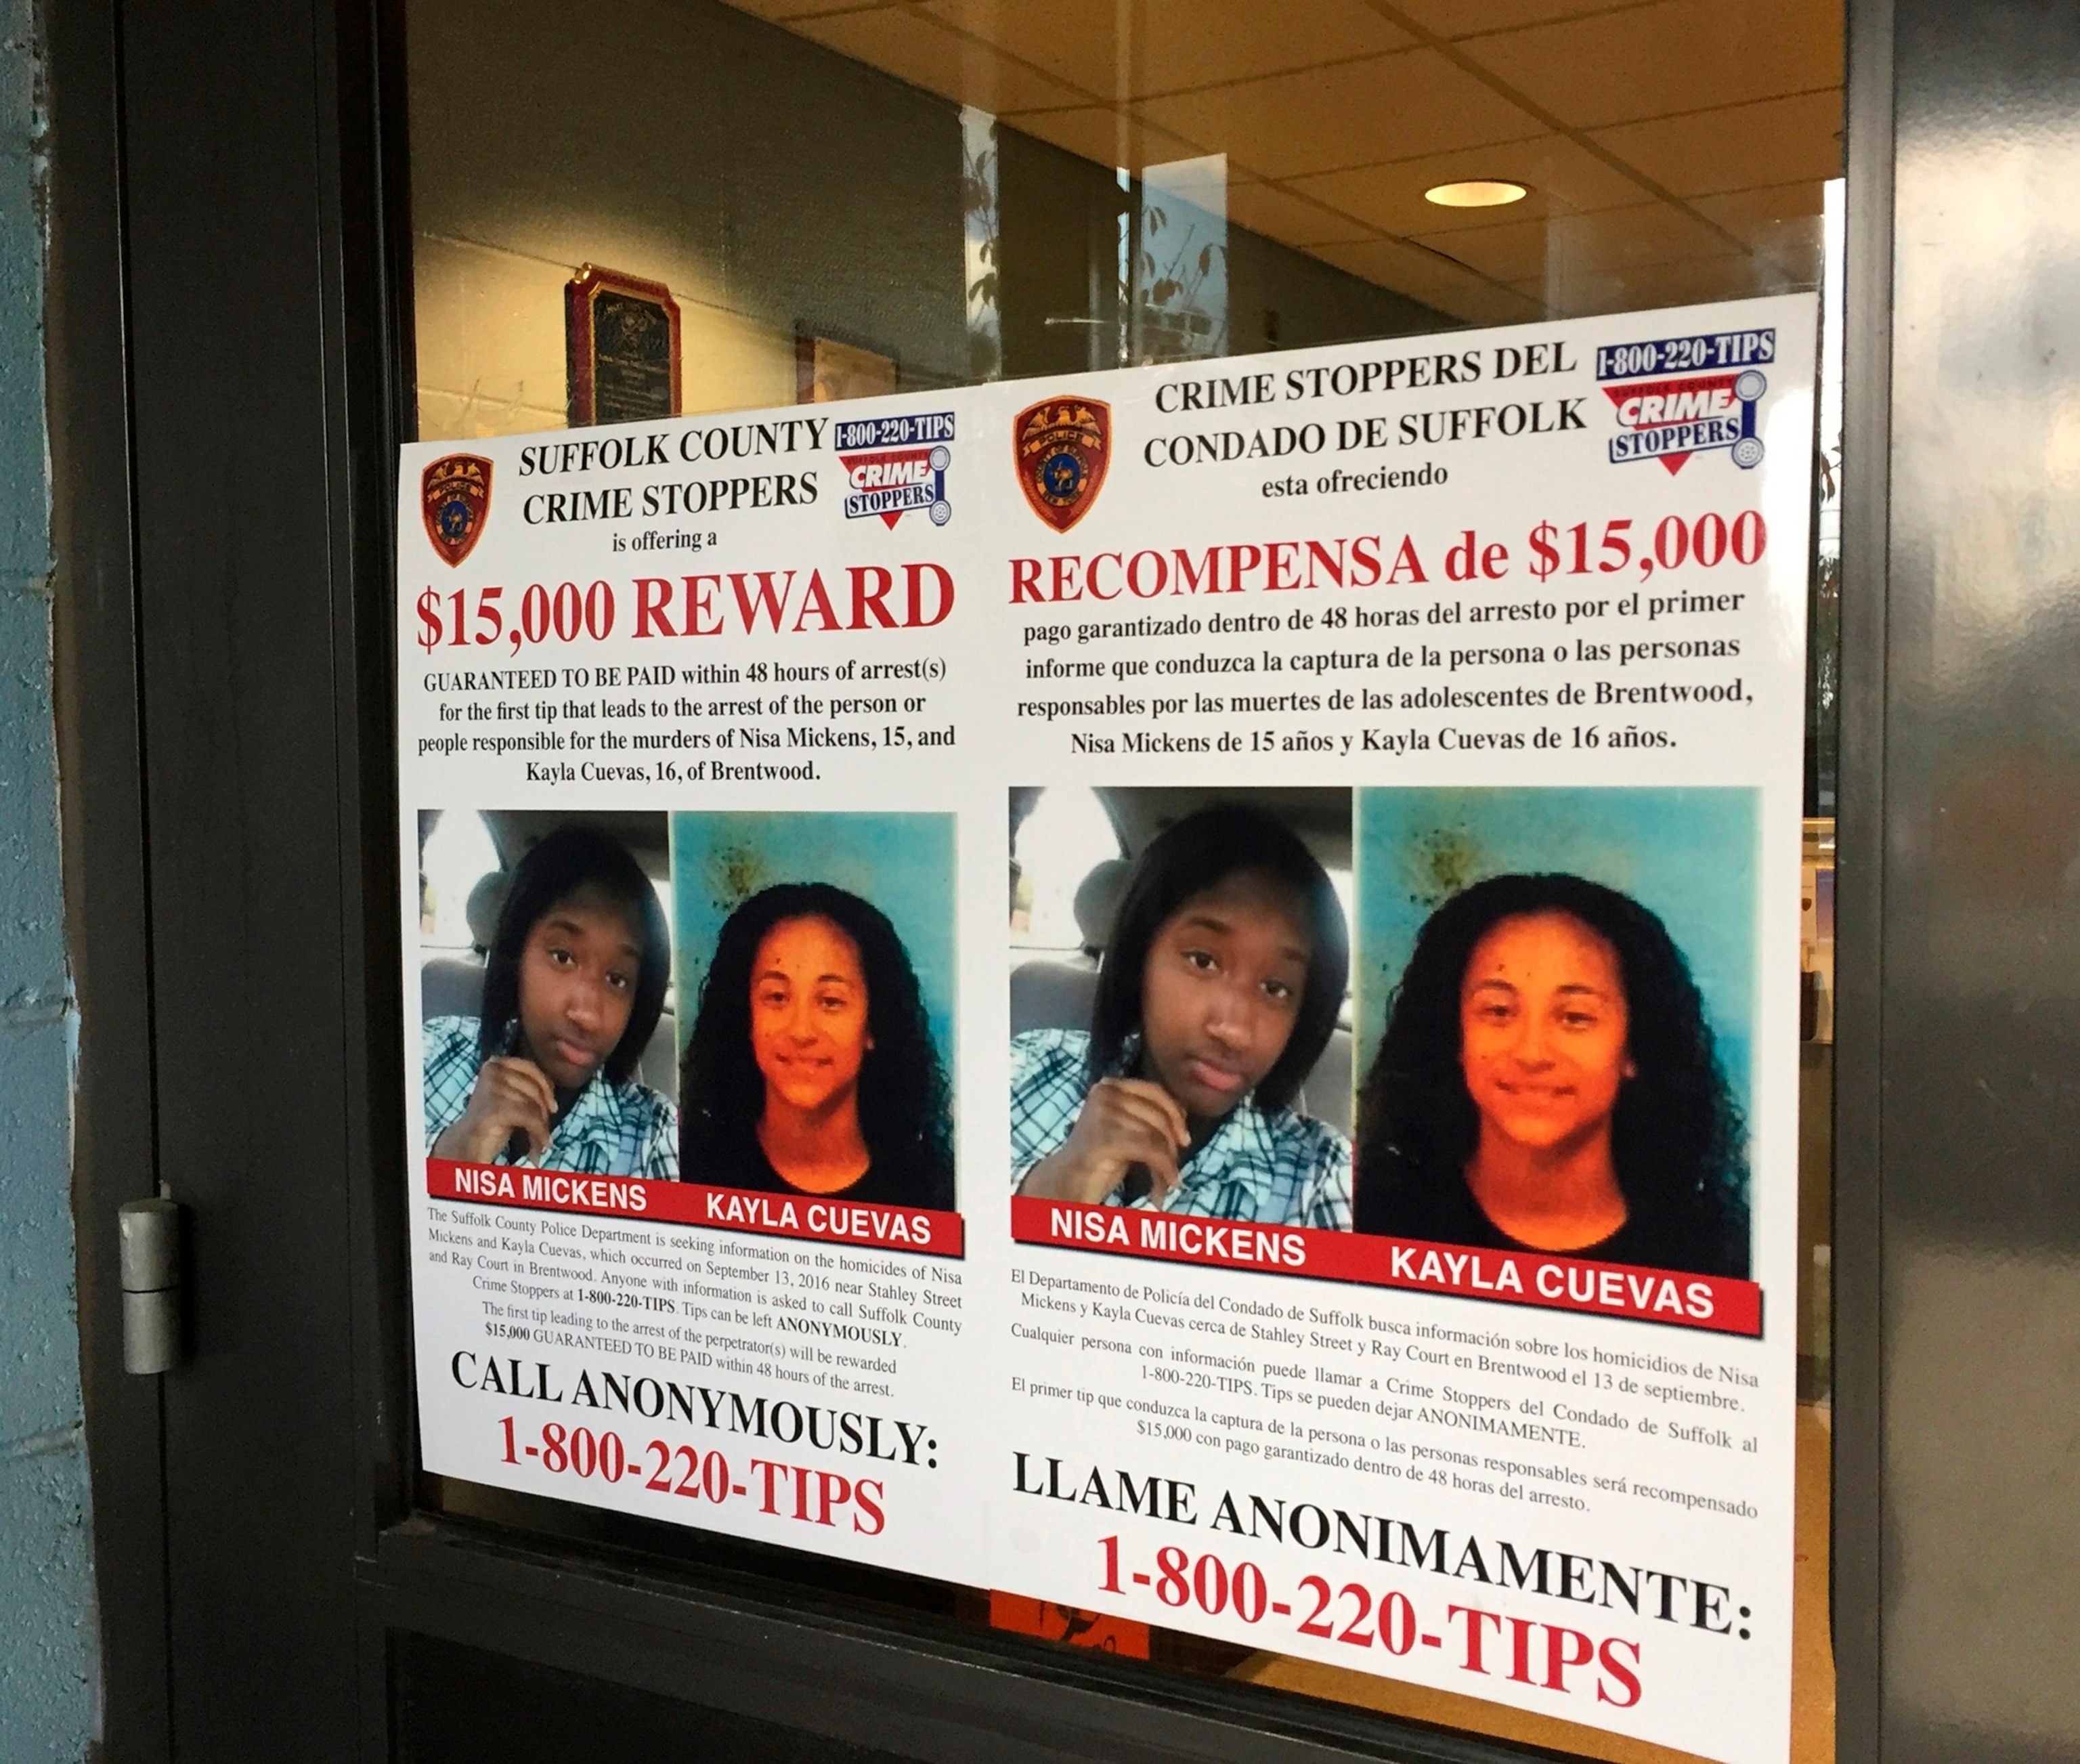 PHOTO: In this Oct. 24, 2016 file photo, a poster displayed at a Suffolk County police precinct in Bay Shore, N.Y.